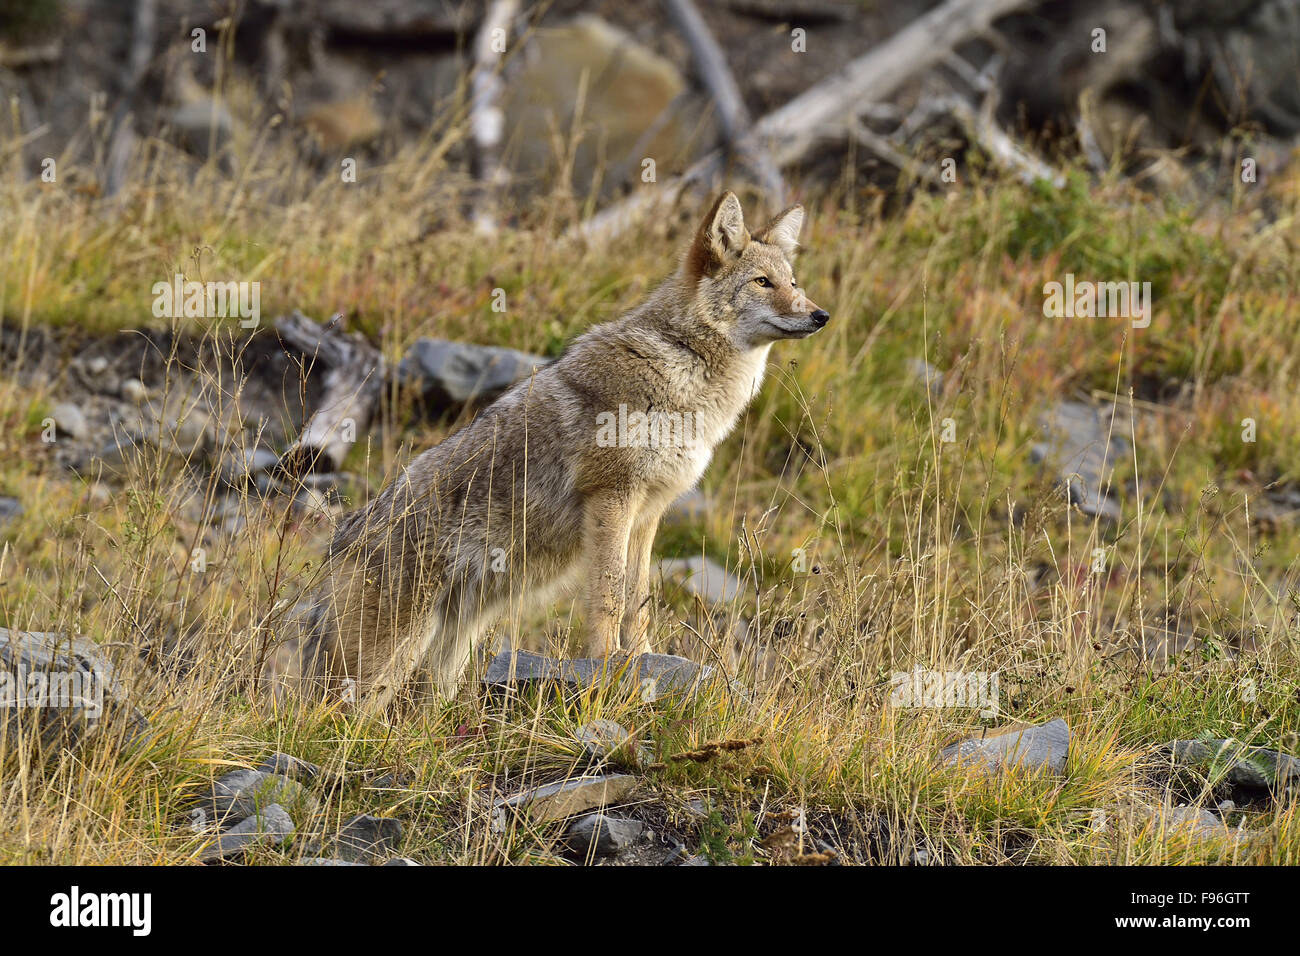 A wild coyote Canis latrans, on a grassy hill side in rural Alberta, Canada Stock Photo